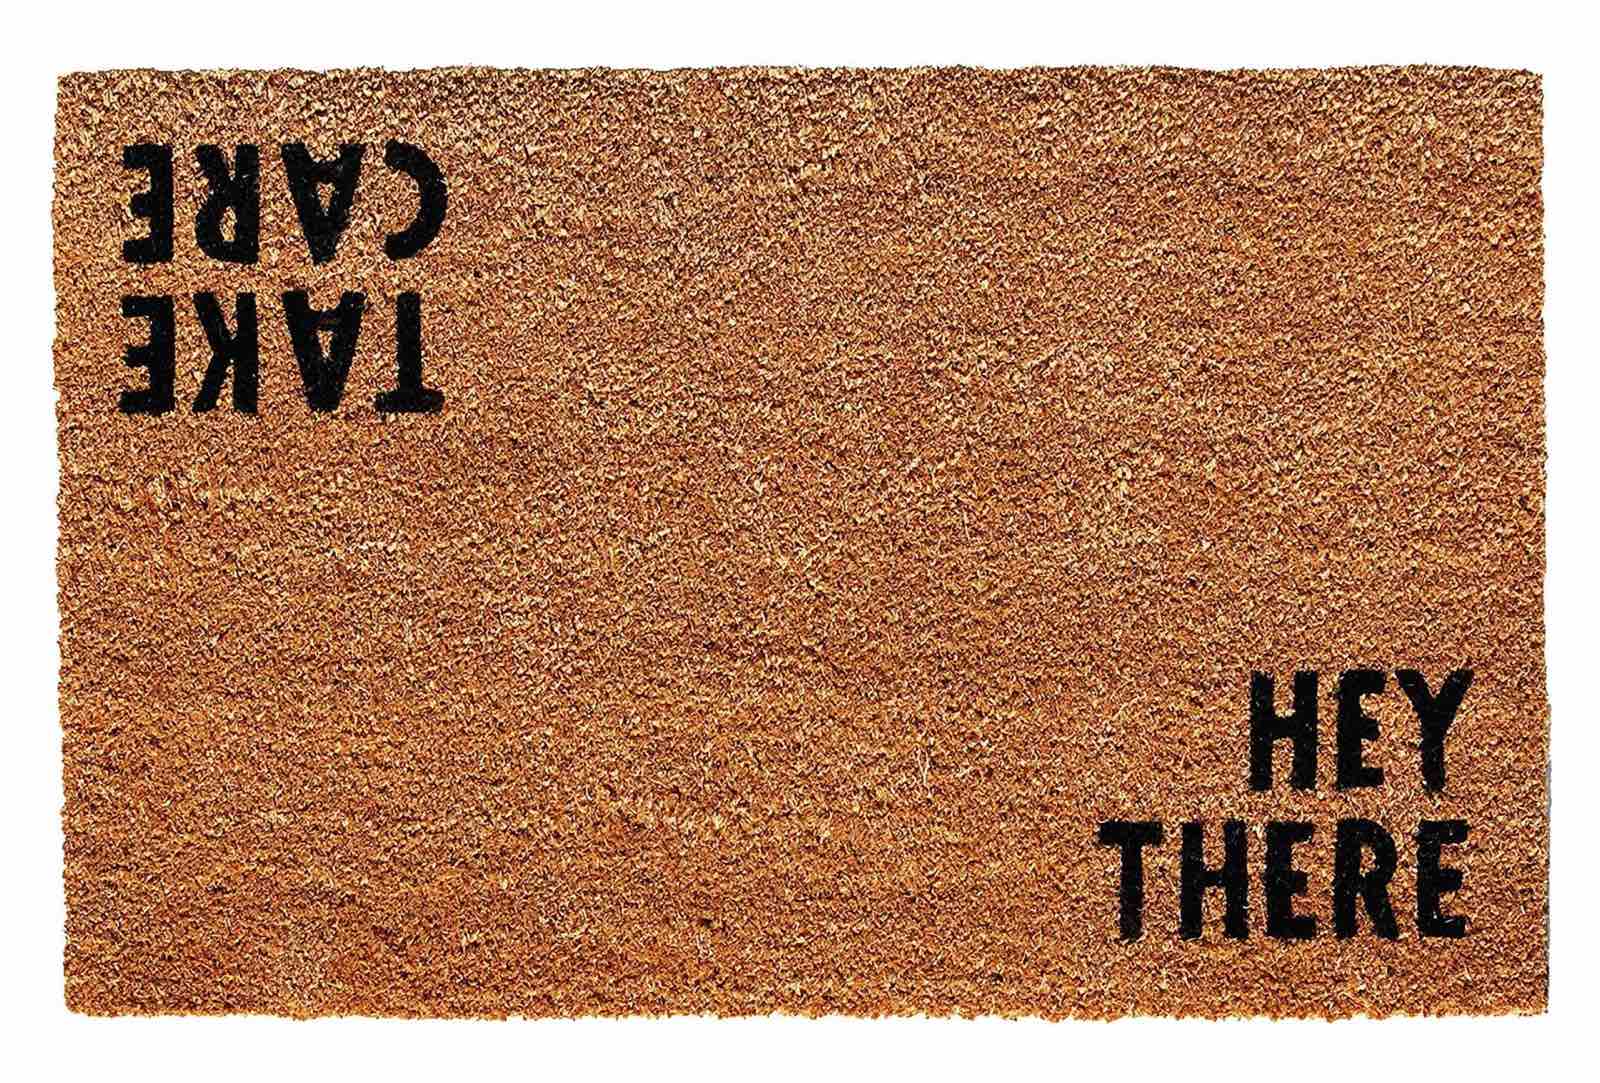 calloway-mills-hey-there-take-care-coir-doormat